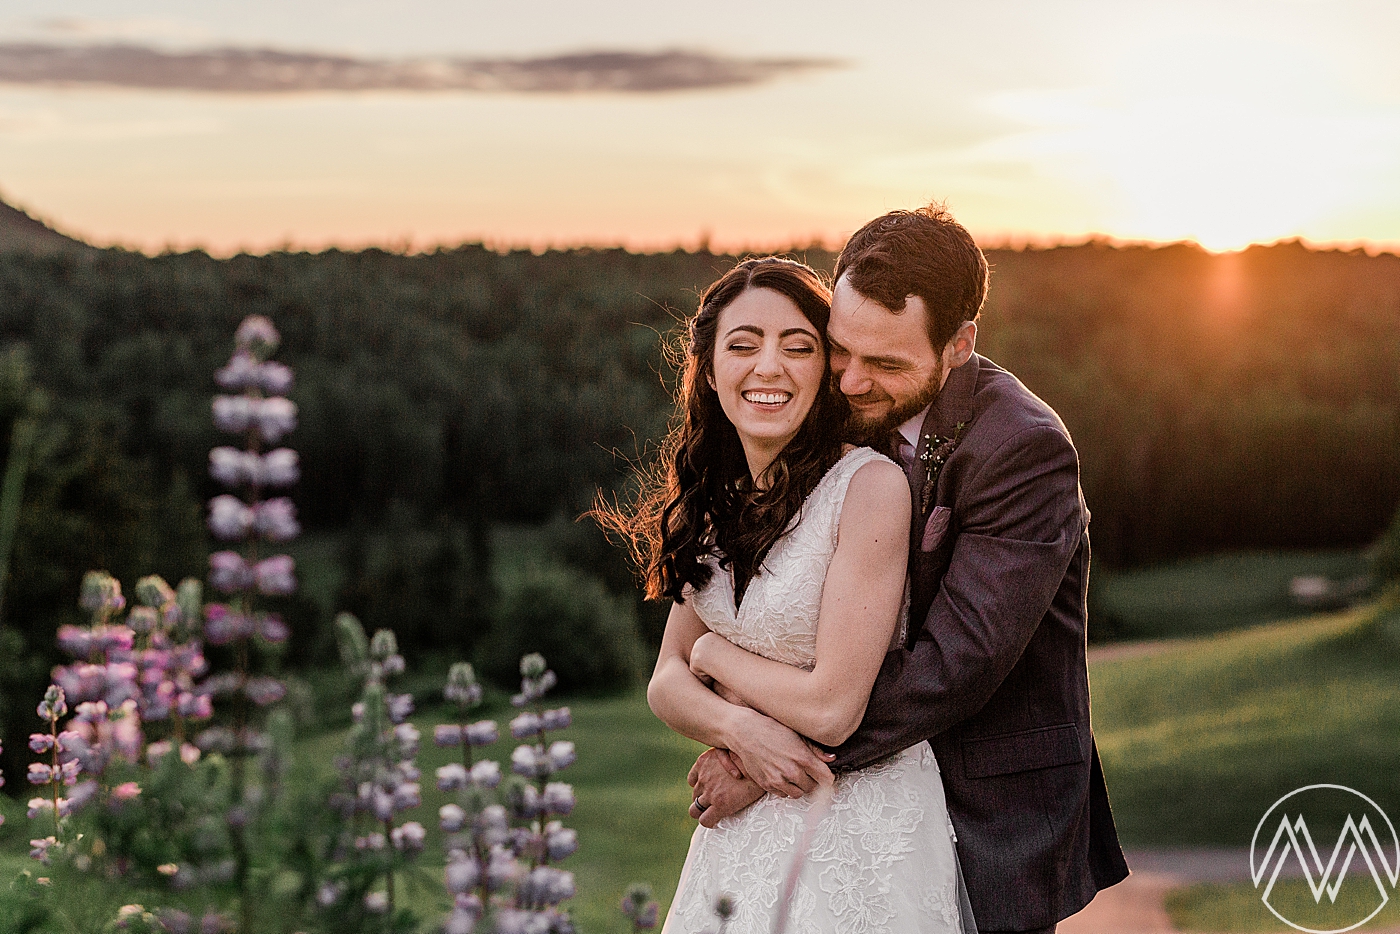 Sunset bride and groom portraits at Eaglemont Golf Course Wedding Venue | Photographed by PNW Wedding Photographer, Megan Montalvo Photography